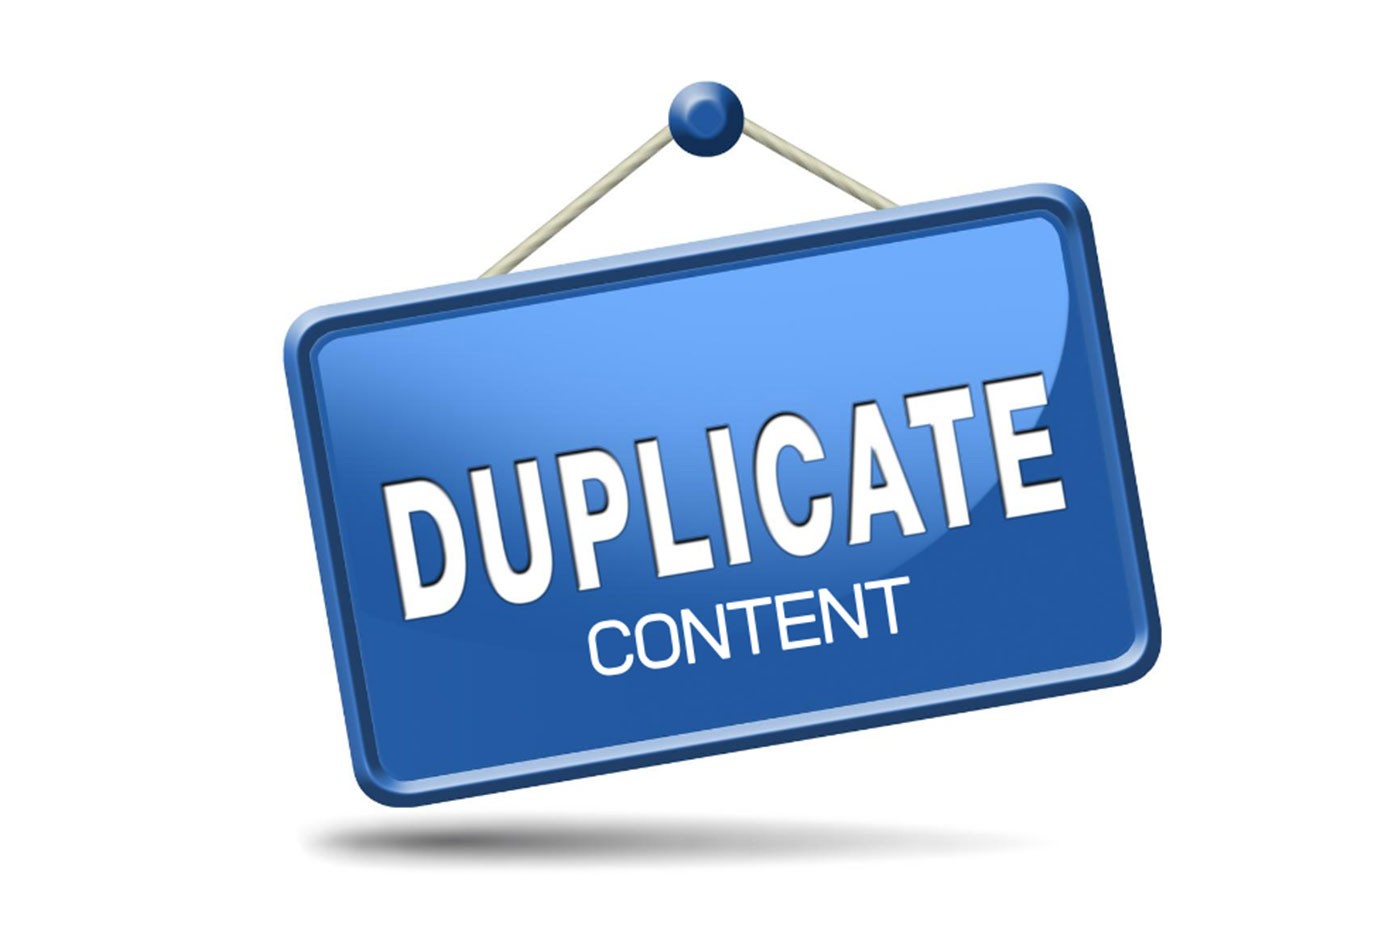 How Do I Avoid Duplicate Content